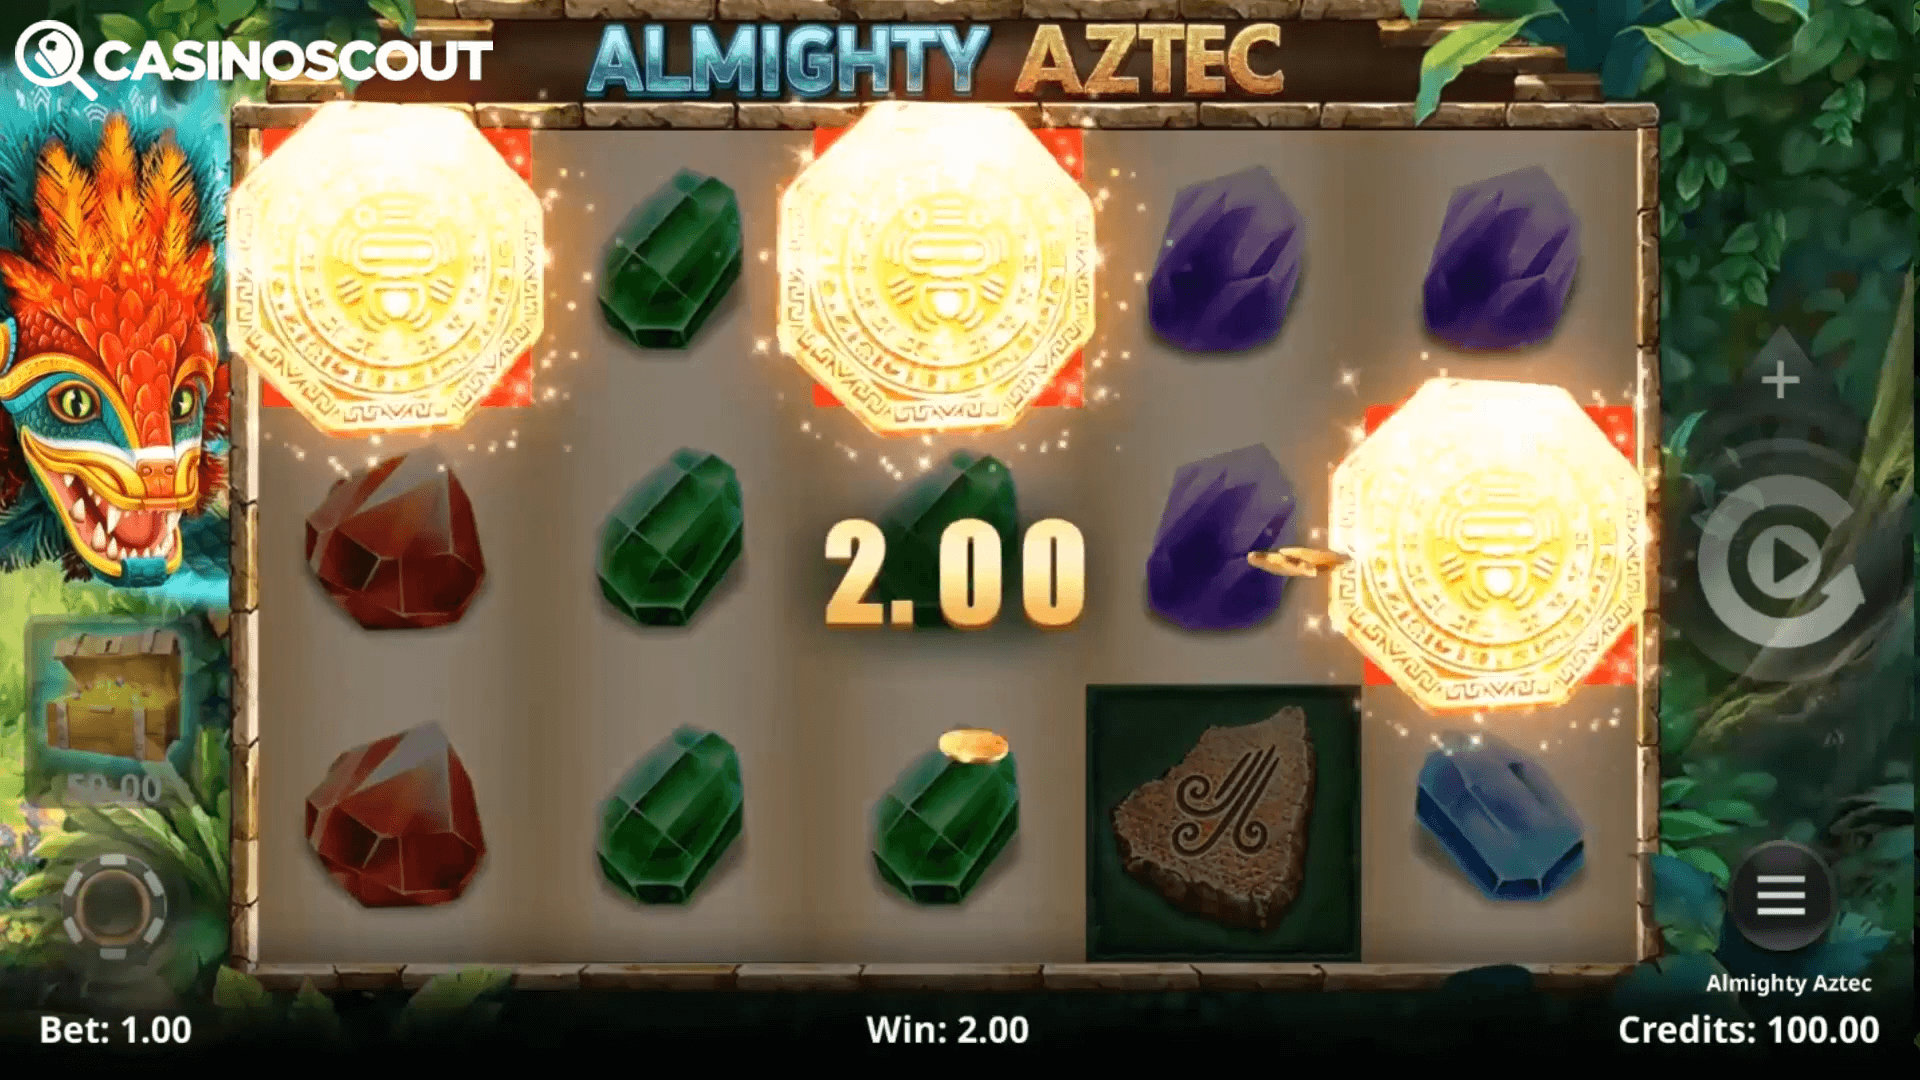 Almighty Aztec Review